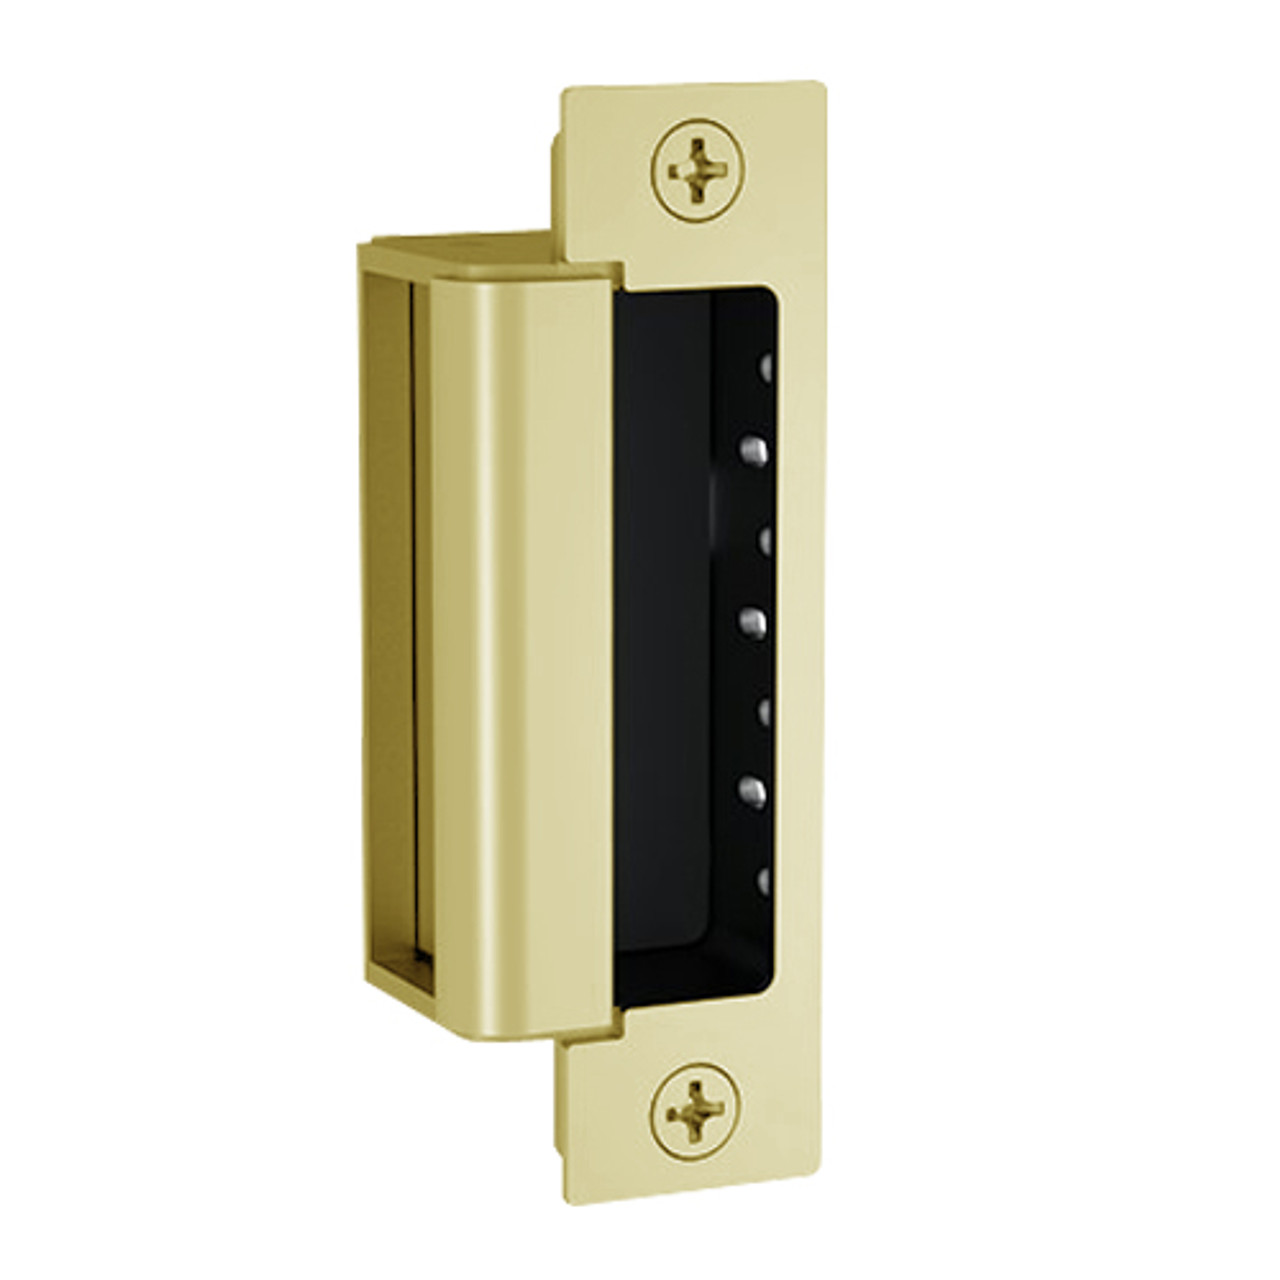 1600-DLM-606 Hes 1600 Series Dynamic Low Profile Electric Strike Bodies with Dual Lock Monitor in Satin Brass